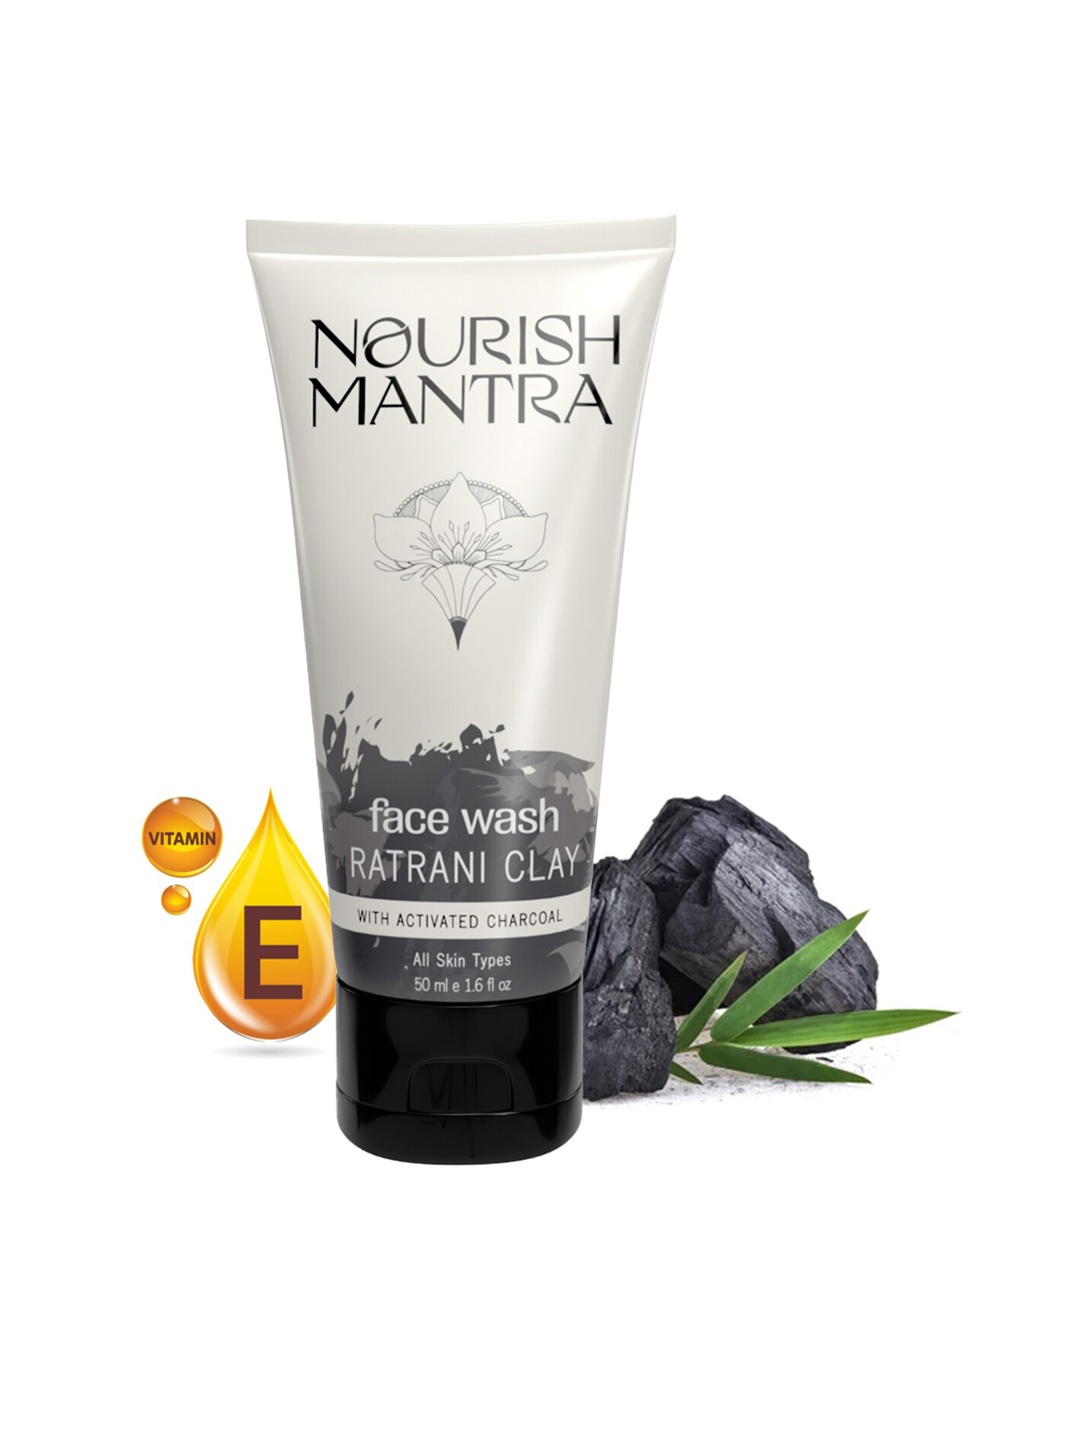 

Nourish Mantra Ratrani Clay Moroccan Lava Face Wash With Activated Charcoal - 50 ml, Grey